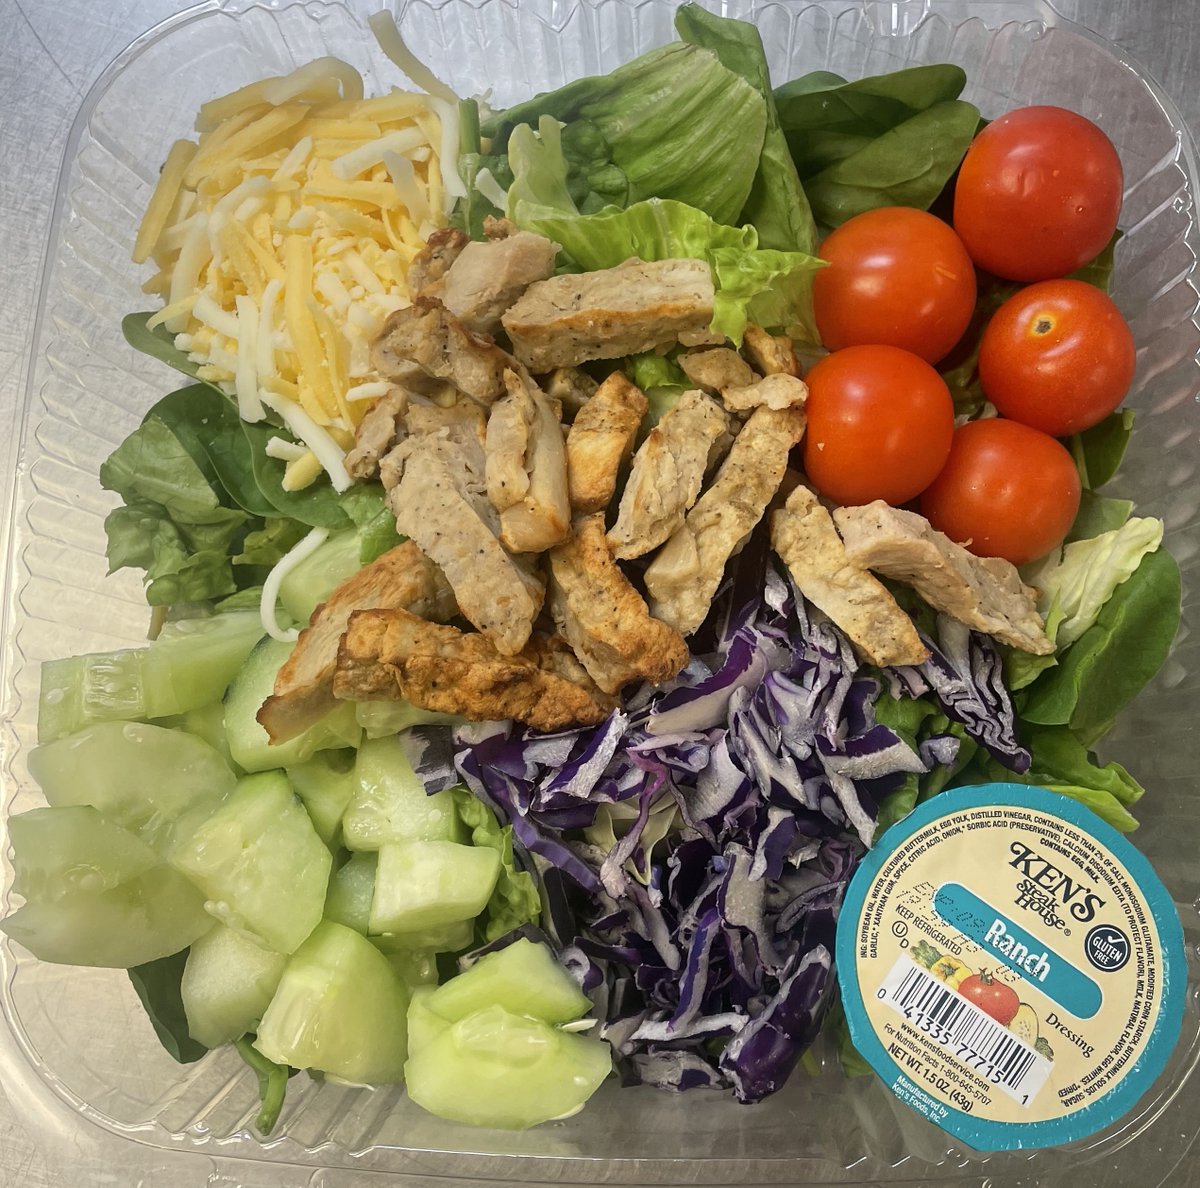 🥗 Chicken fajita salad and blueberry delight are just a taste of what's available in the high school cafeteria today. Who said school lunches couldn't be delicious? 😋 #SchoolLunch #HealthyEating